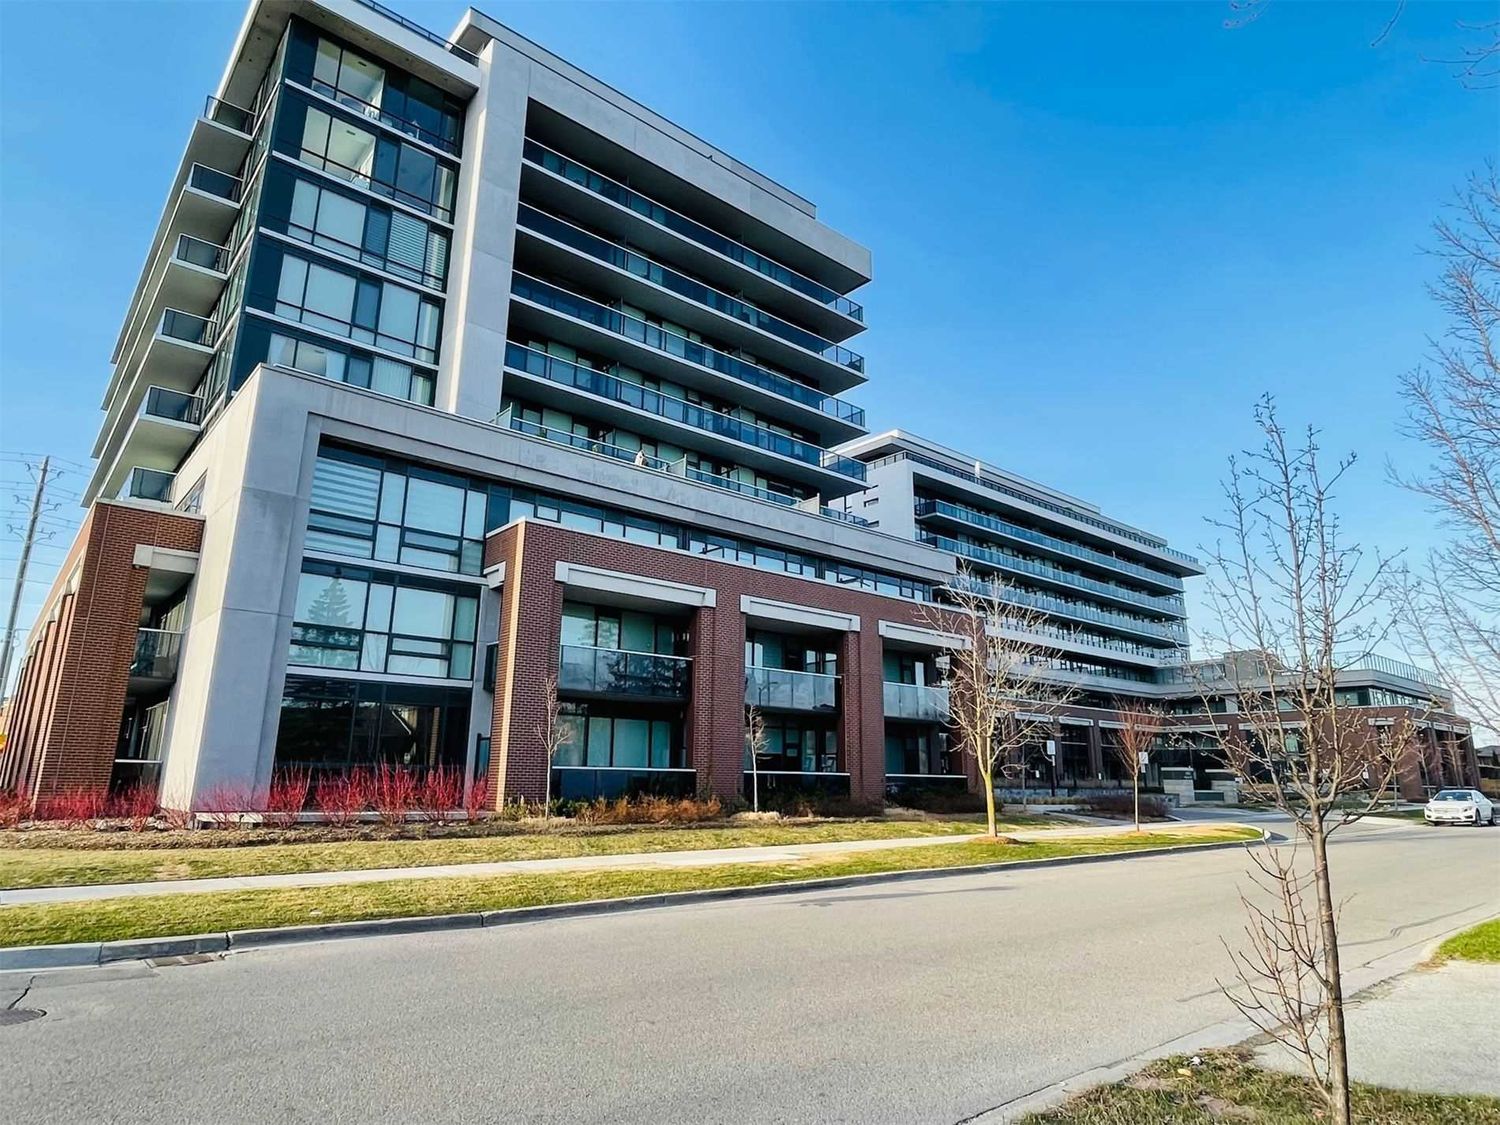 4800 Highway 7. Avenue on 7 Condos is located in  Vaughan, Toronto - image #2 of 3